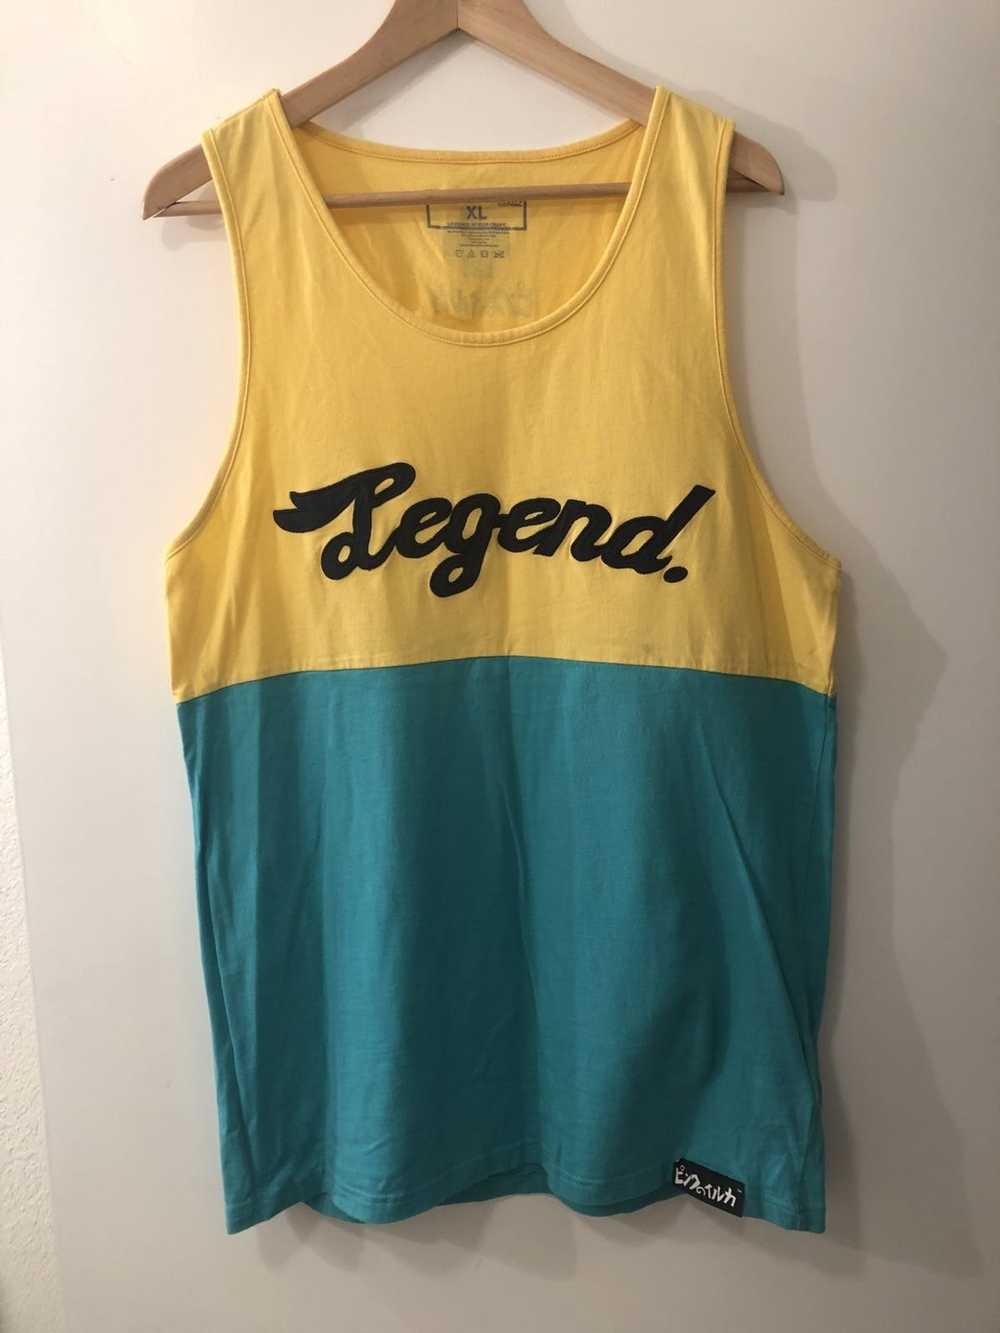 Pink Dolphin Legends Tank - image 1